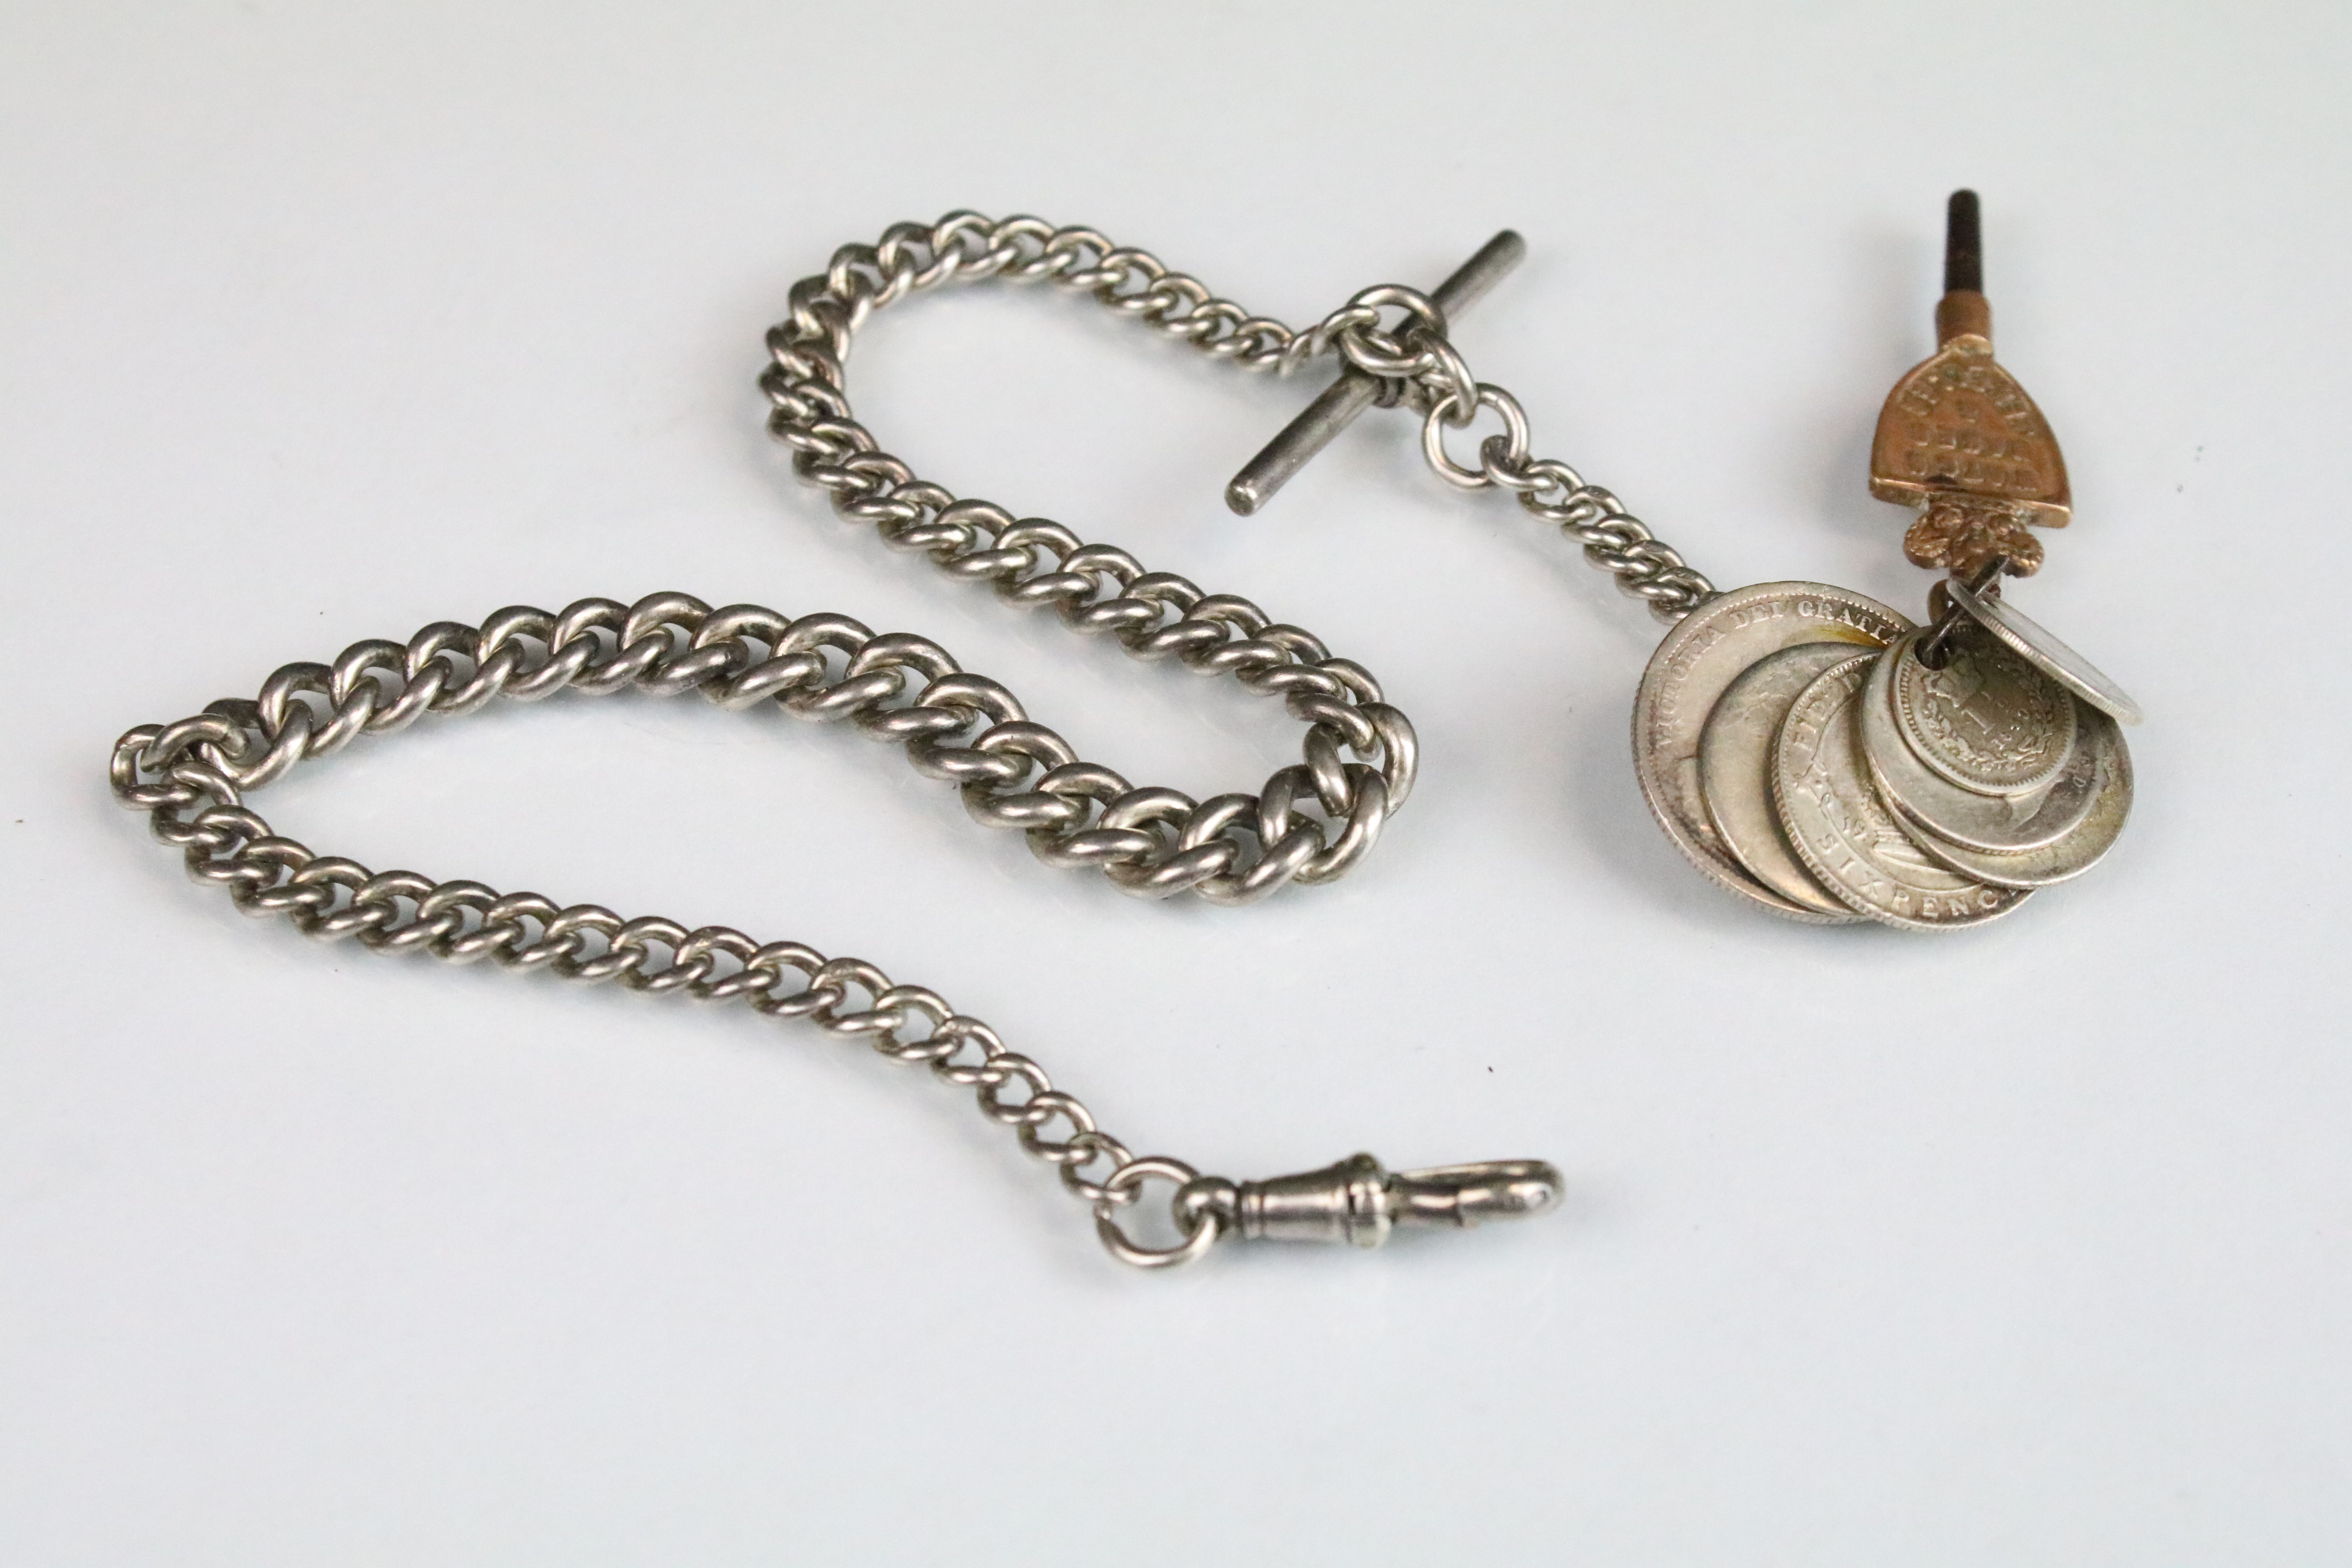 Victorian silver pocket watch chain with graduating links, T bar and dog lead clasp, mounted with - Image 4 of 7